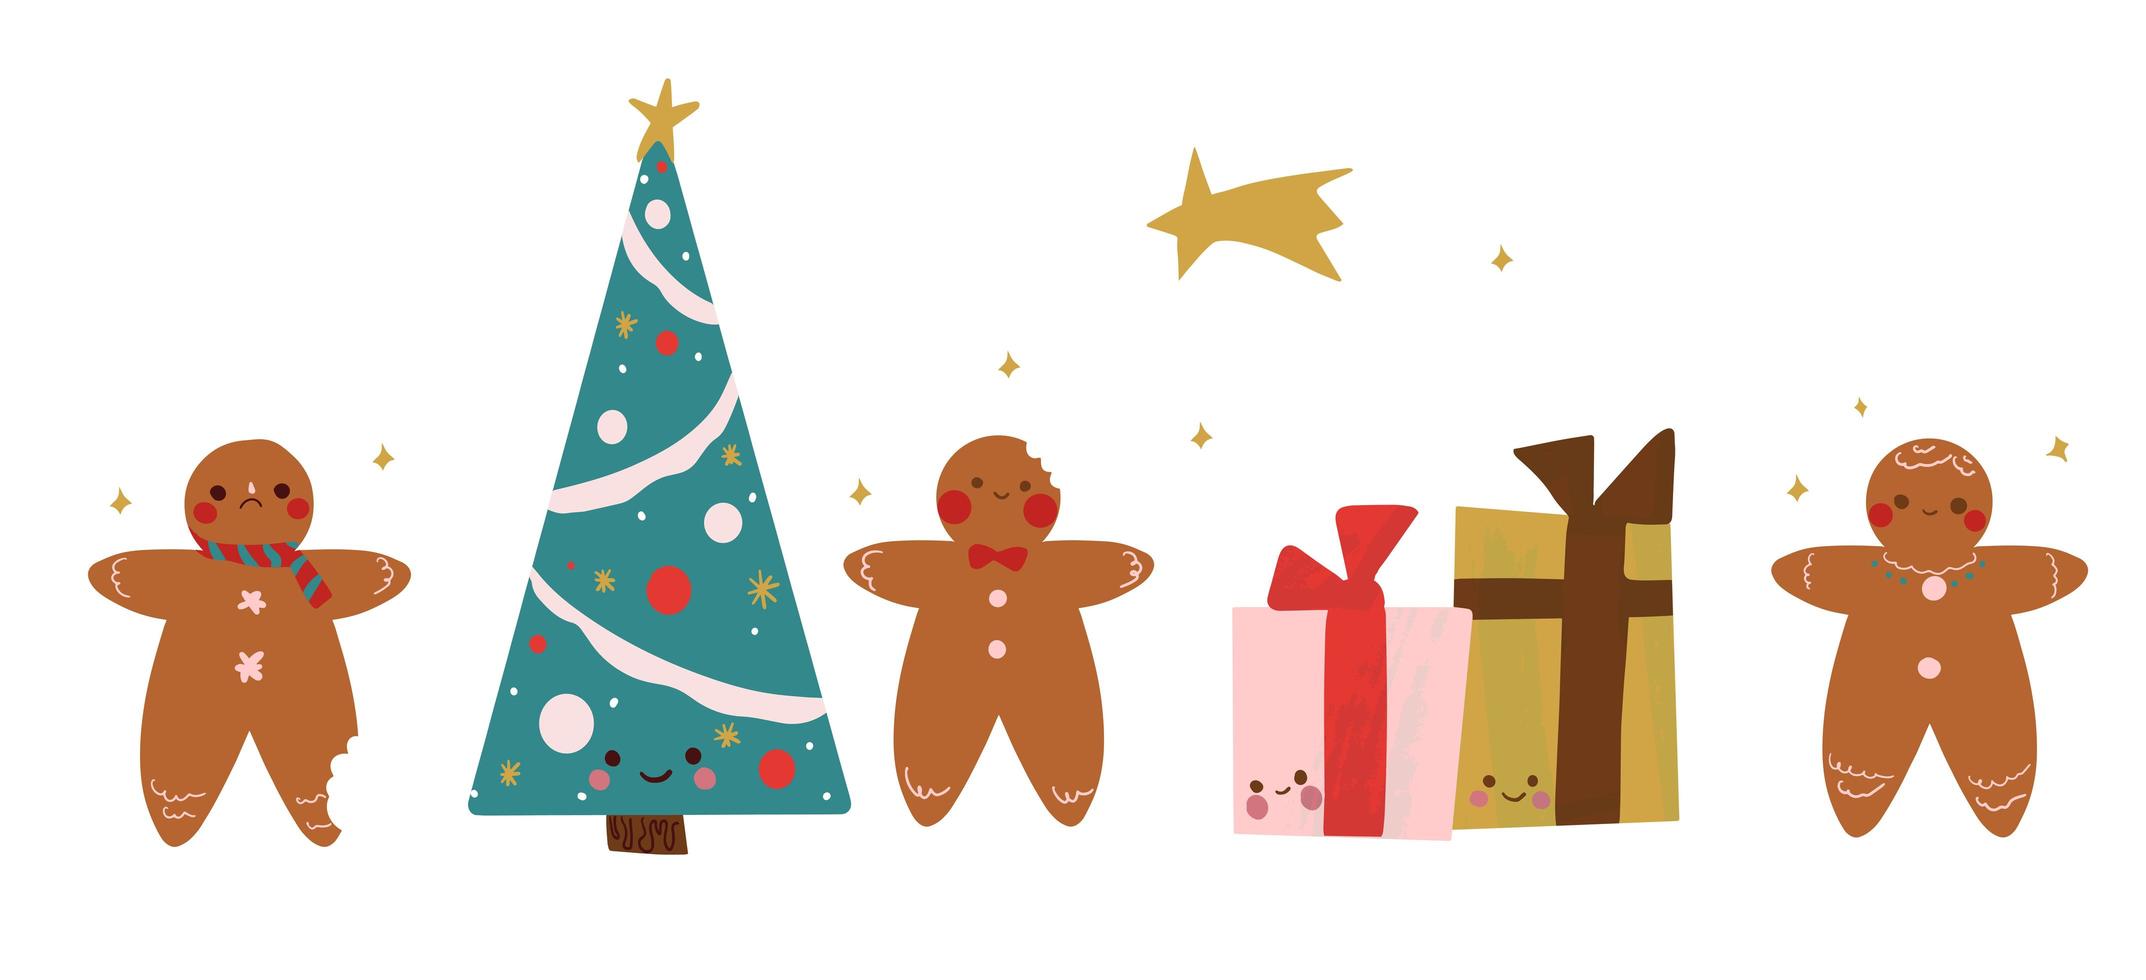 Hand drawn gingerbread, gifts and tree Christmas set vector